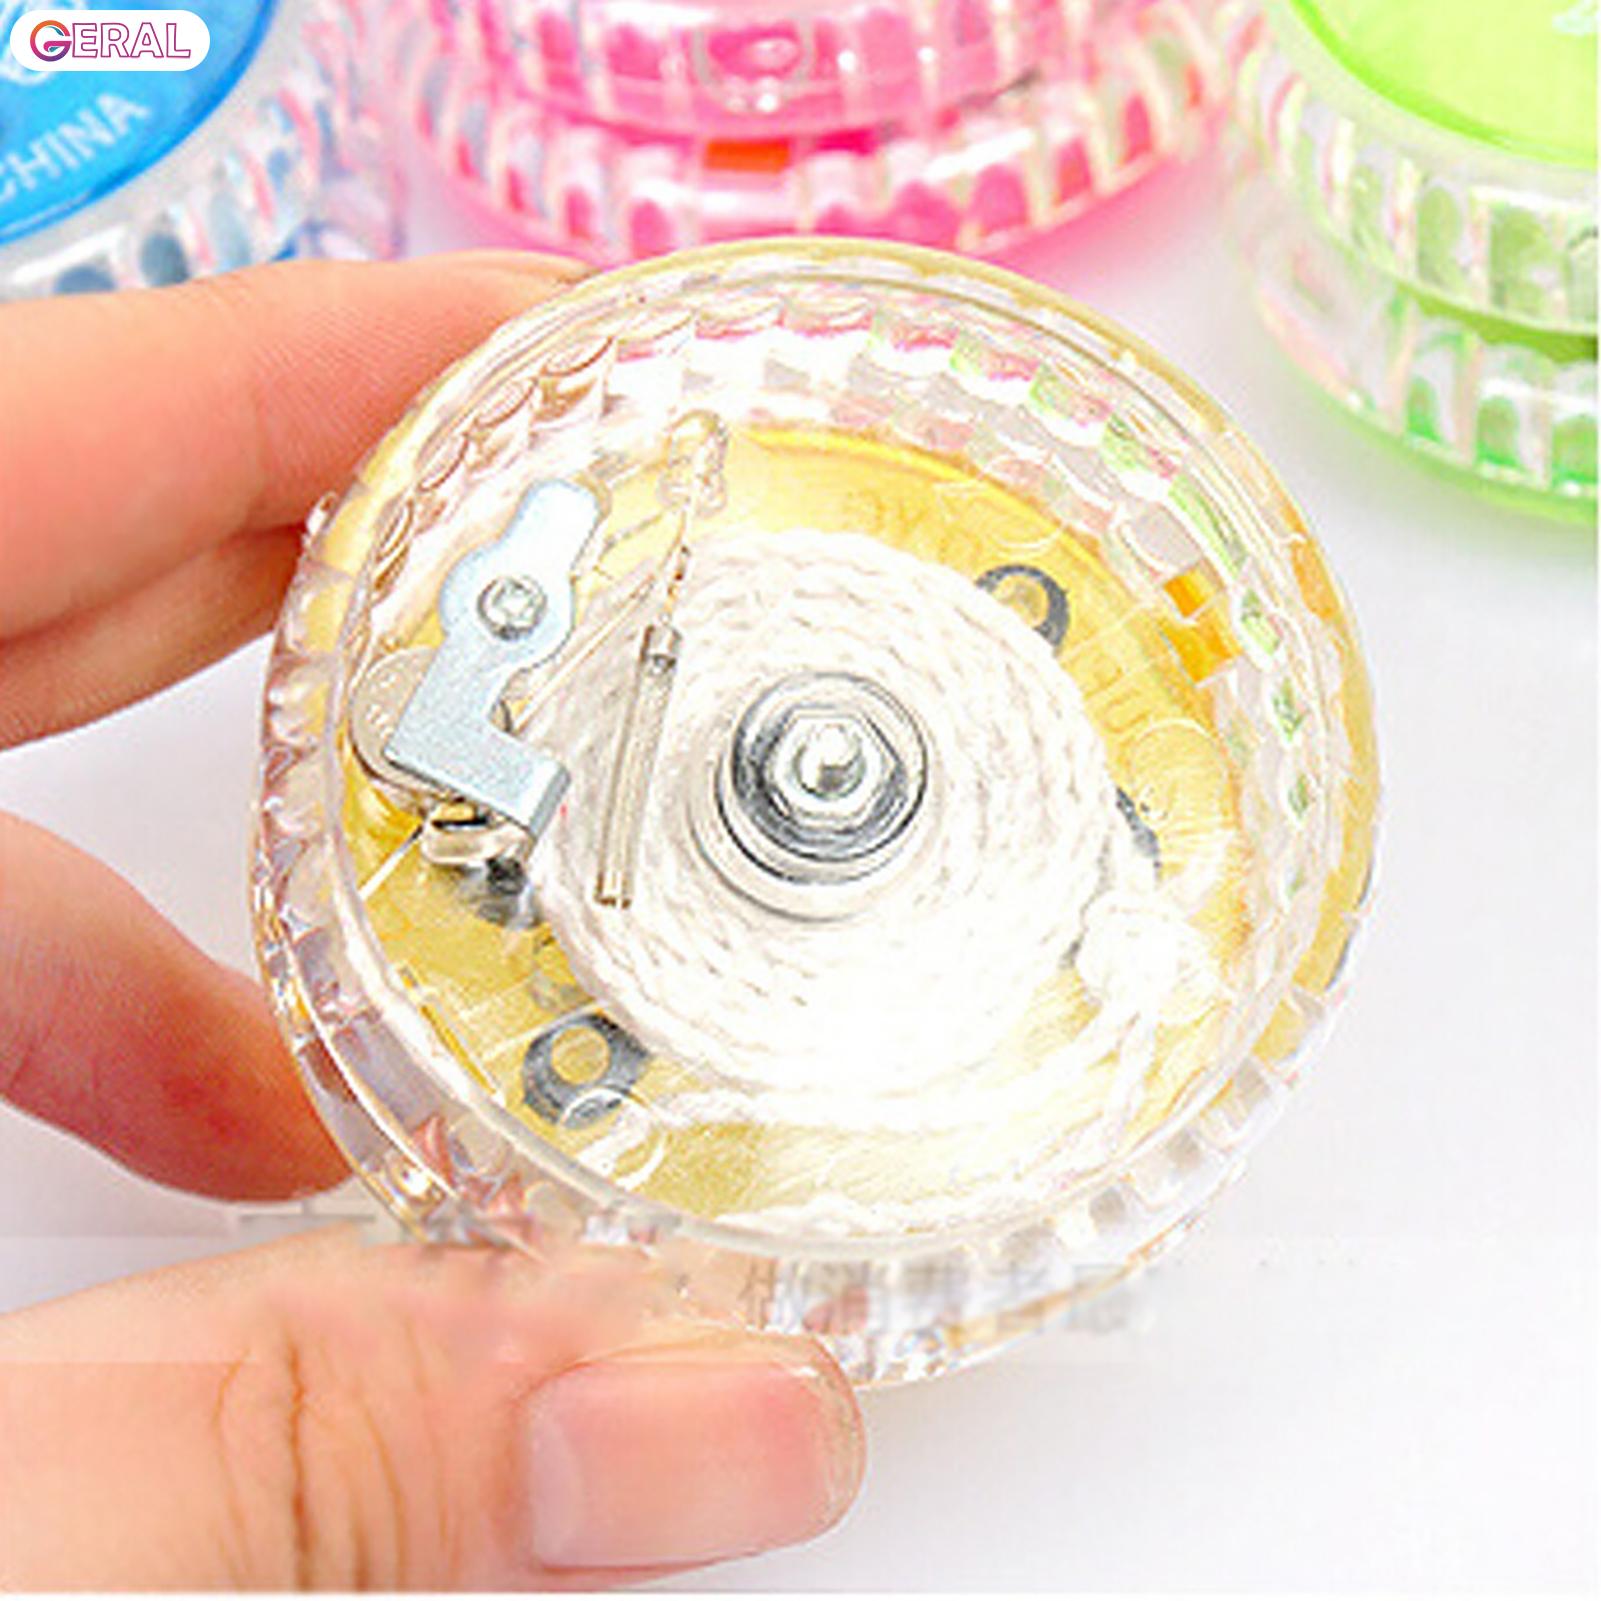 Geral Luminous Small Toy Colorful Yo